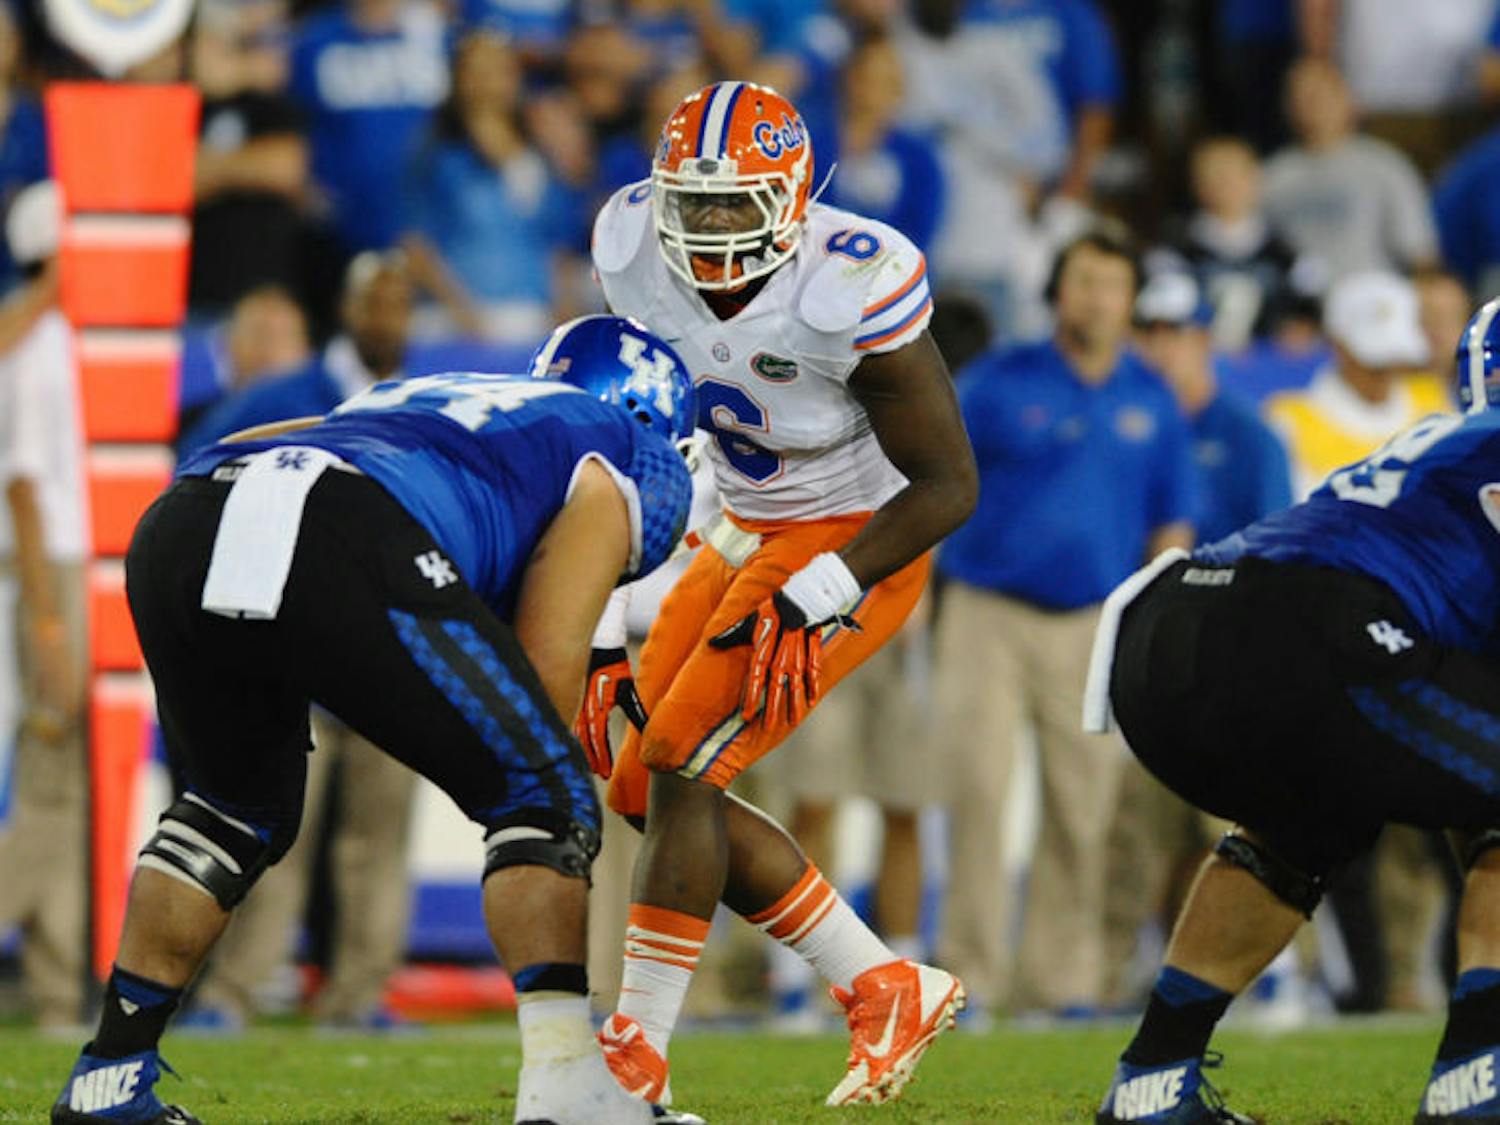 Dante Fowler Jr. awaits a snap during Florida’s 24-7 win against Kentucky on Sept. 28, 2013, at Commonwealth Stadium. Fowler looks to become one of UF's leaders on defense this season.